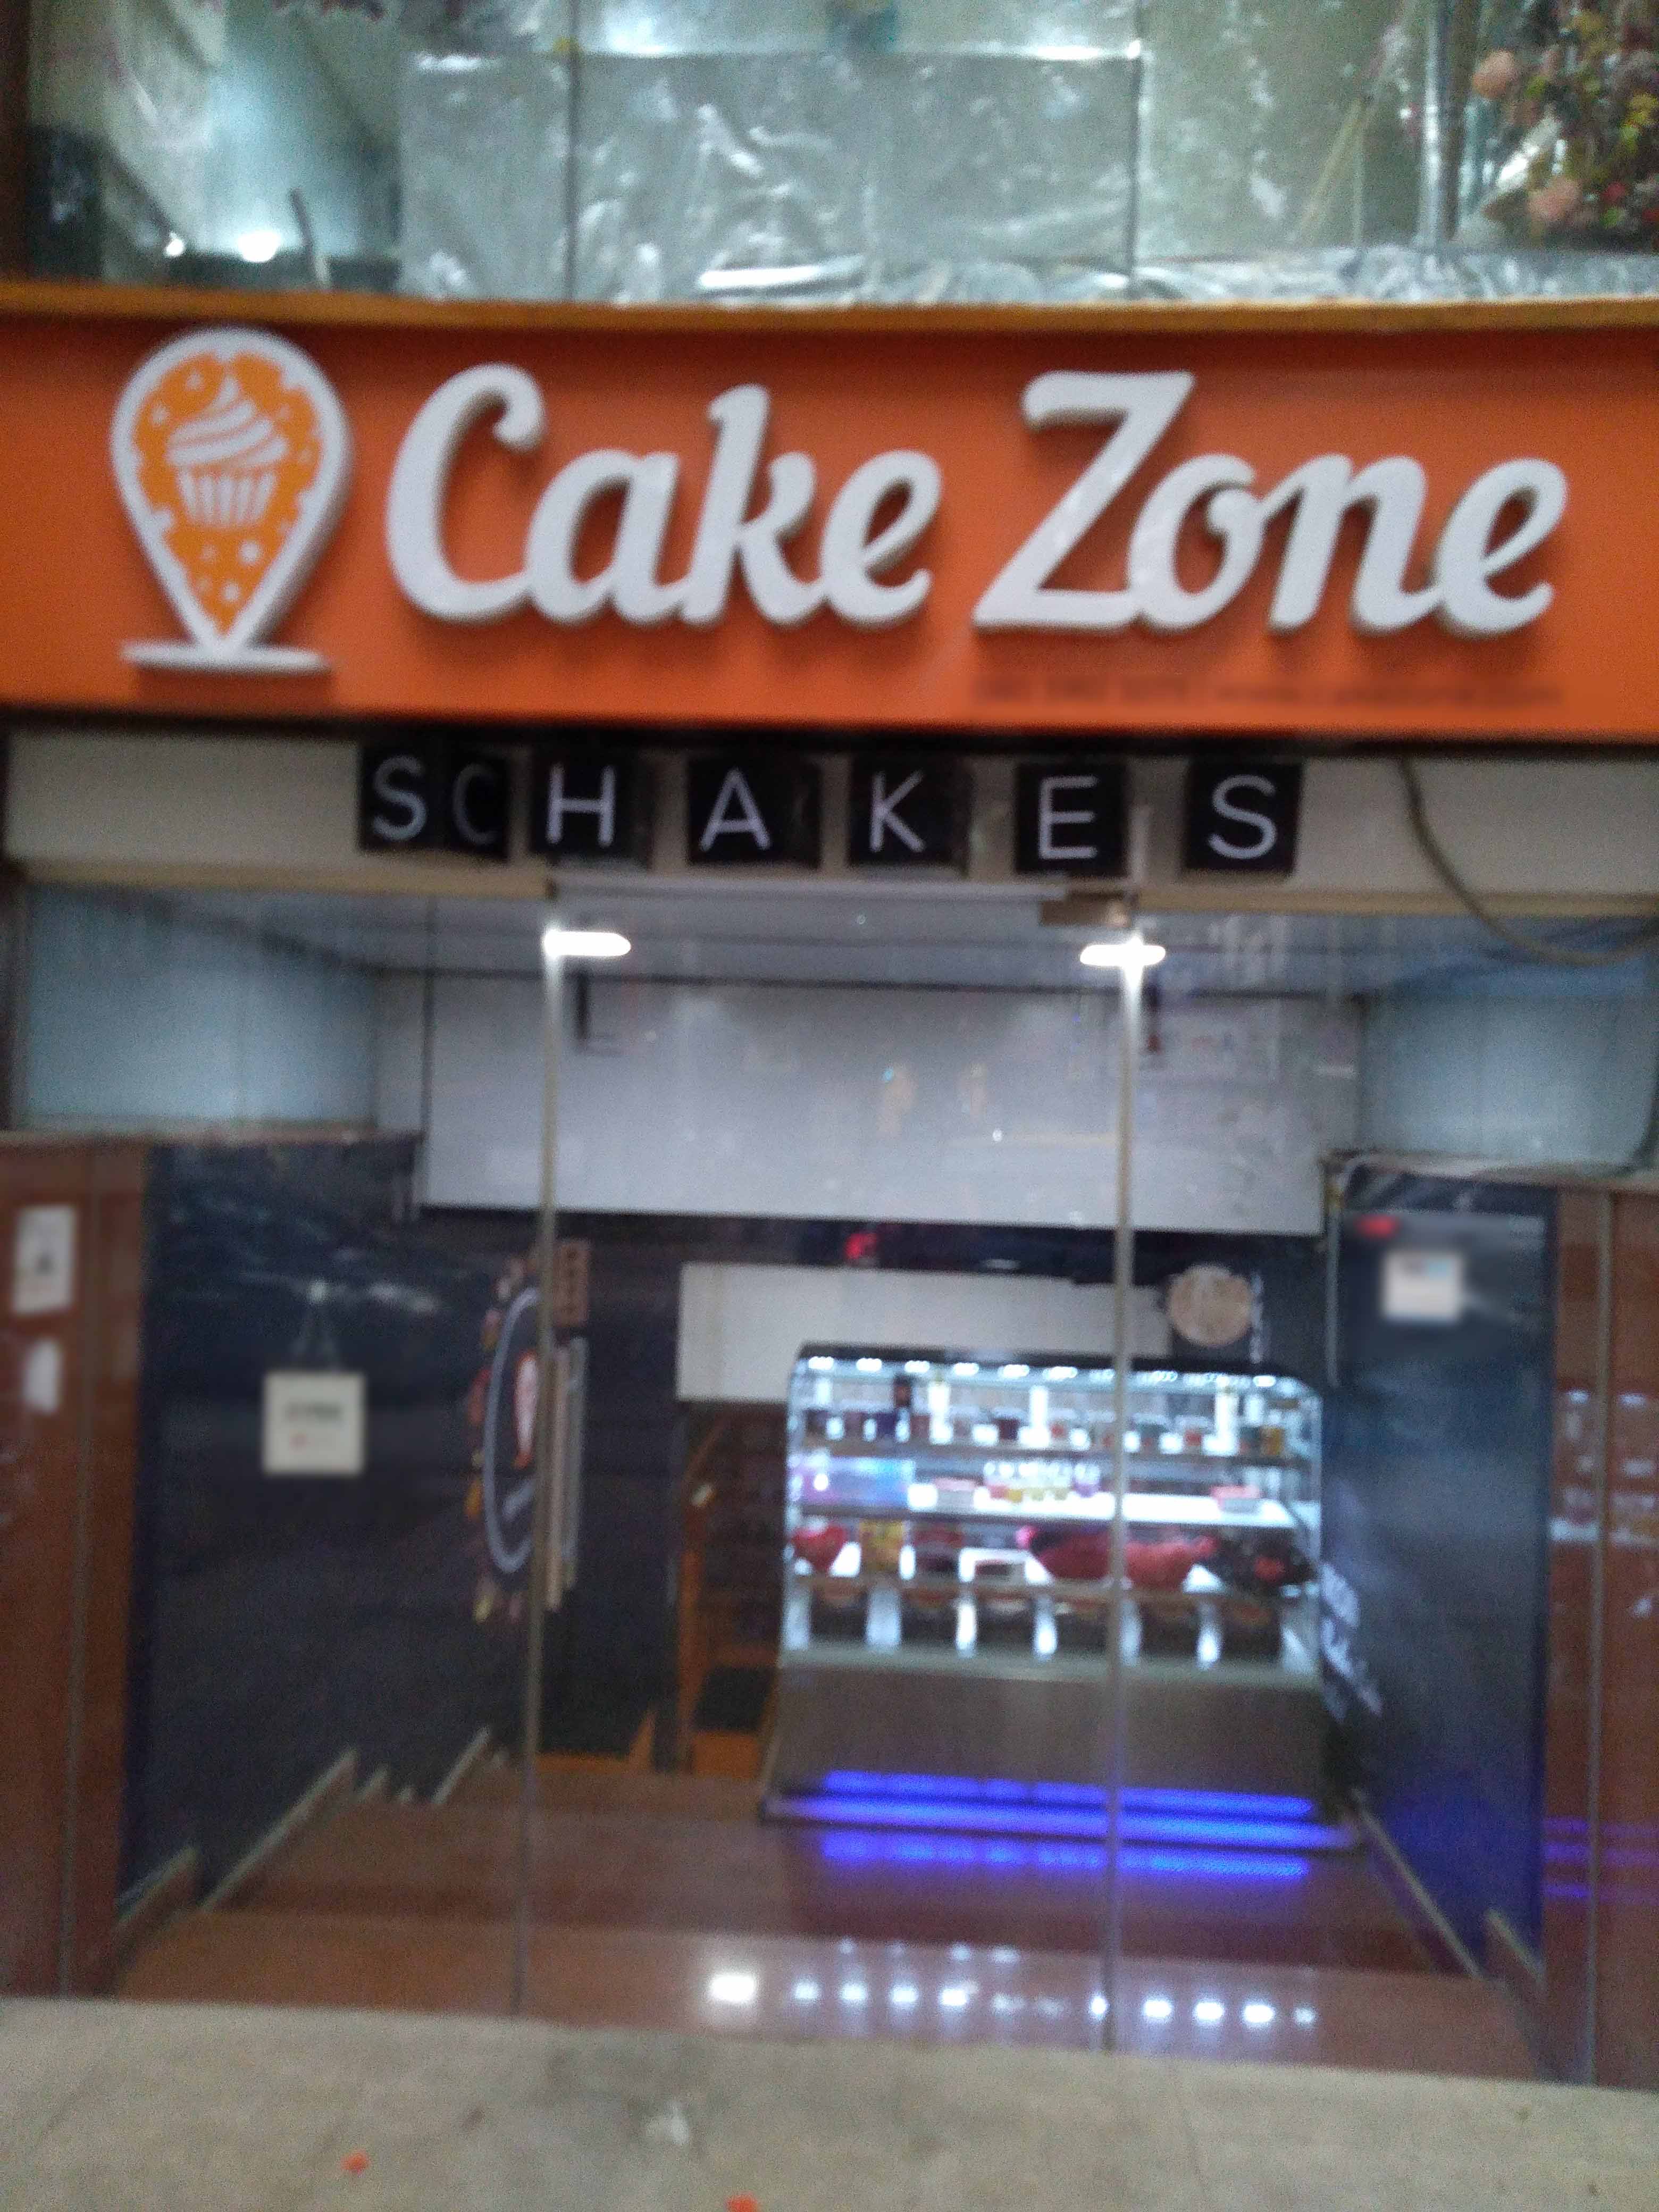 Cake Zone in Whitefield,Bangalore - Best Bakeries in Bangalore - Justdial